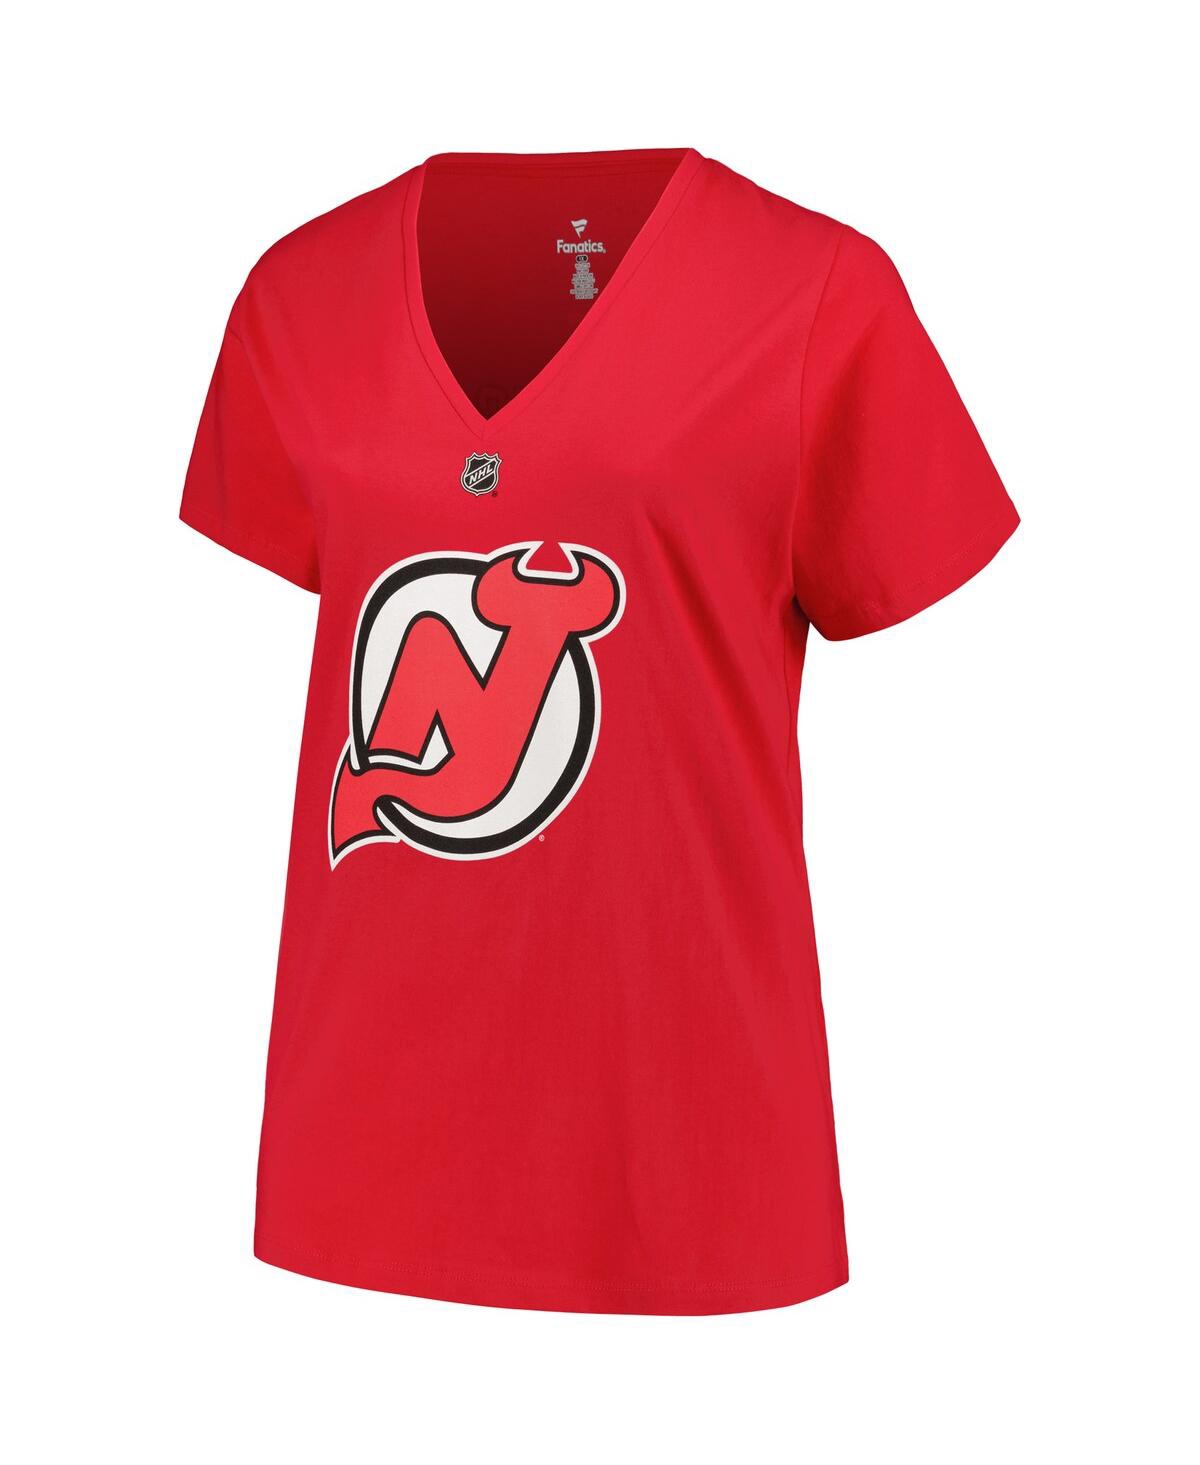 Shop Fanatics Branded Women's Jack Hughes Red New Jersey Devils Plus Size Name Number T-shirt